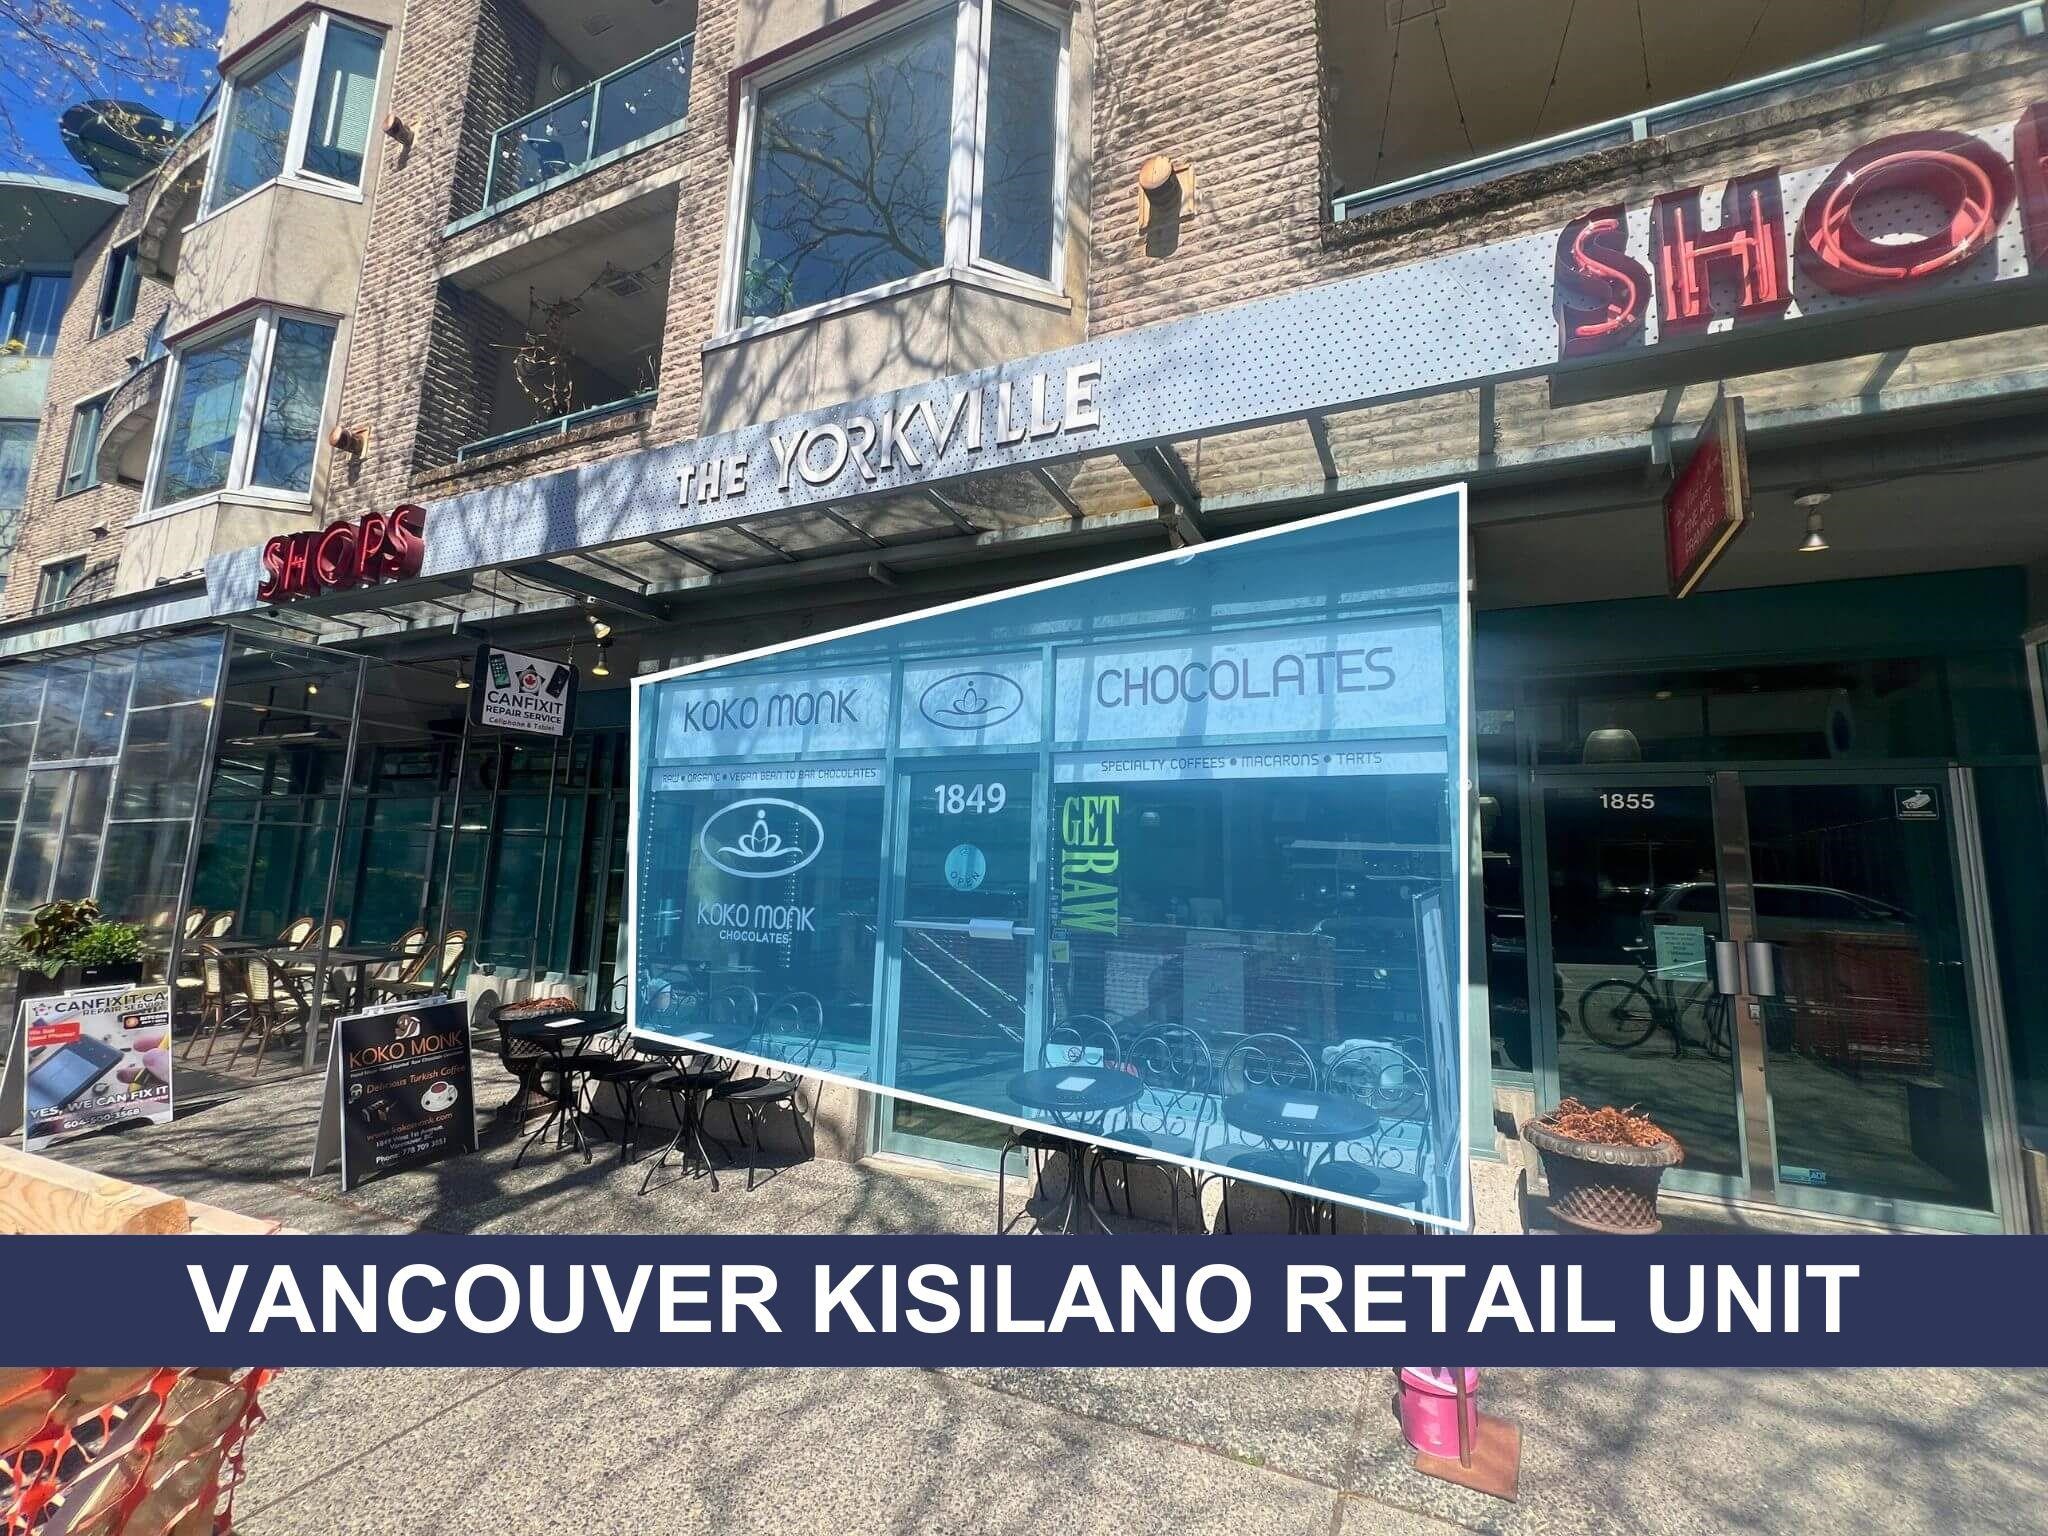 Kitsilano Land Commercial for sale:    (Listed 6800-05-02)